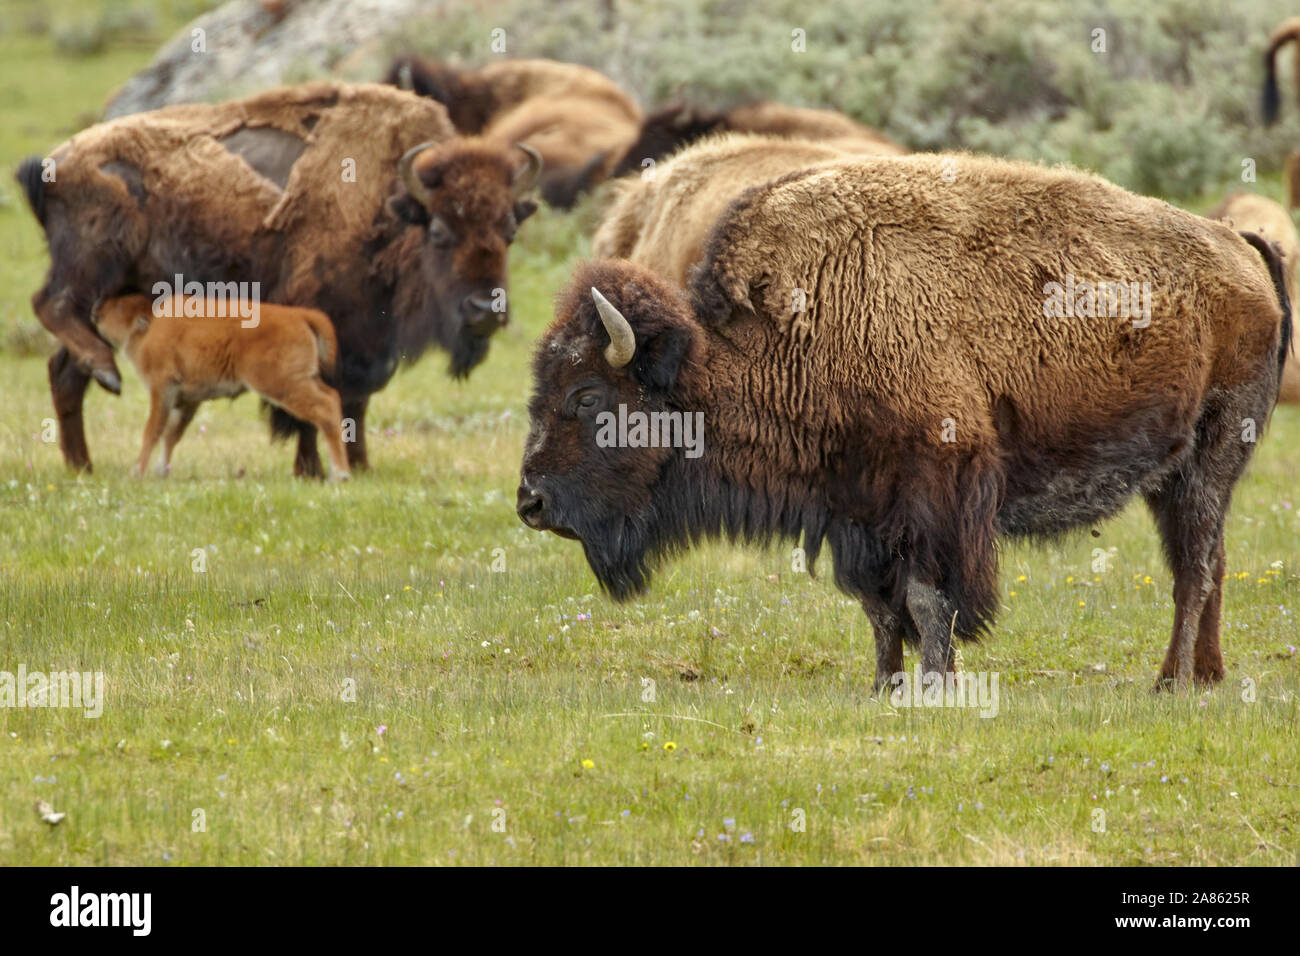 American Bison in Yellowstone National Park, Wyoming, USA Stock Photo